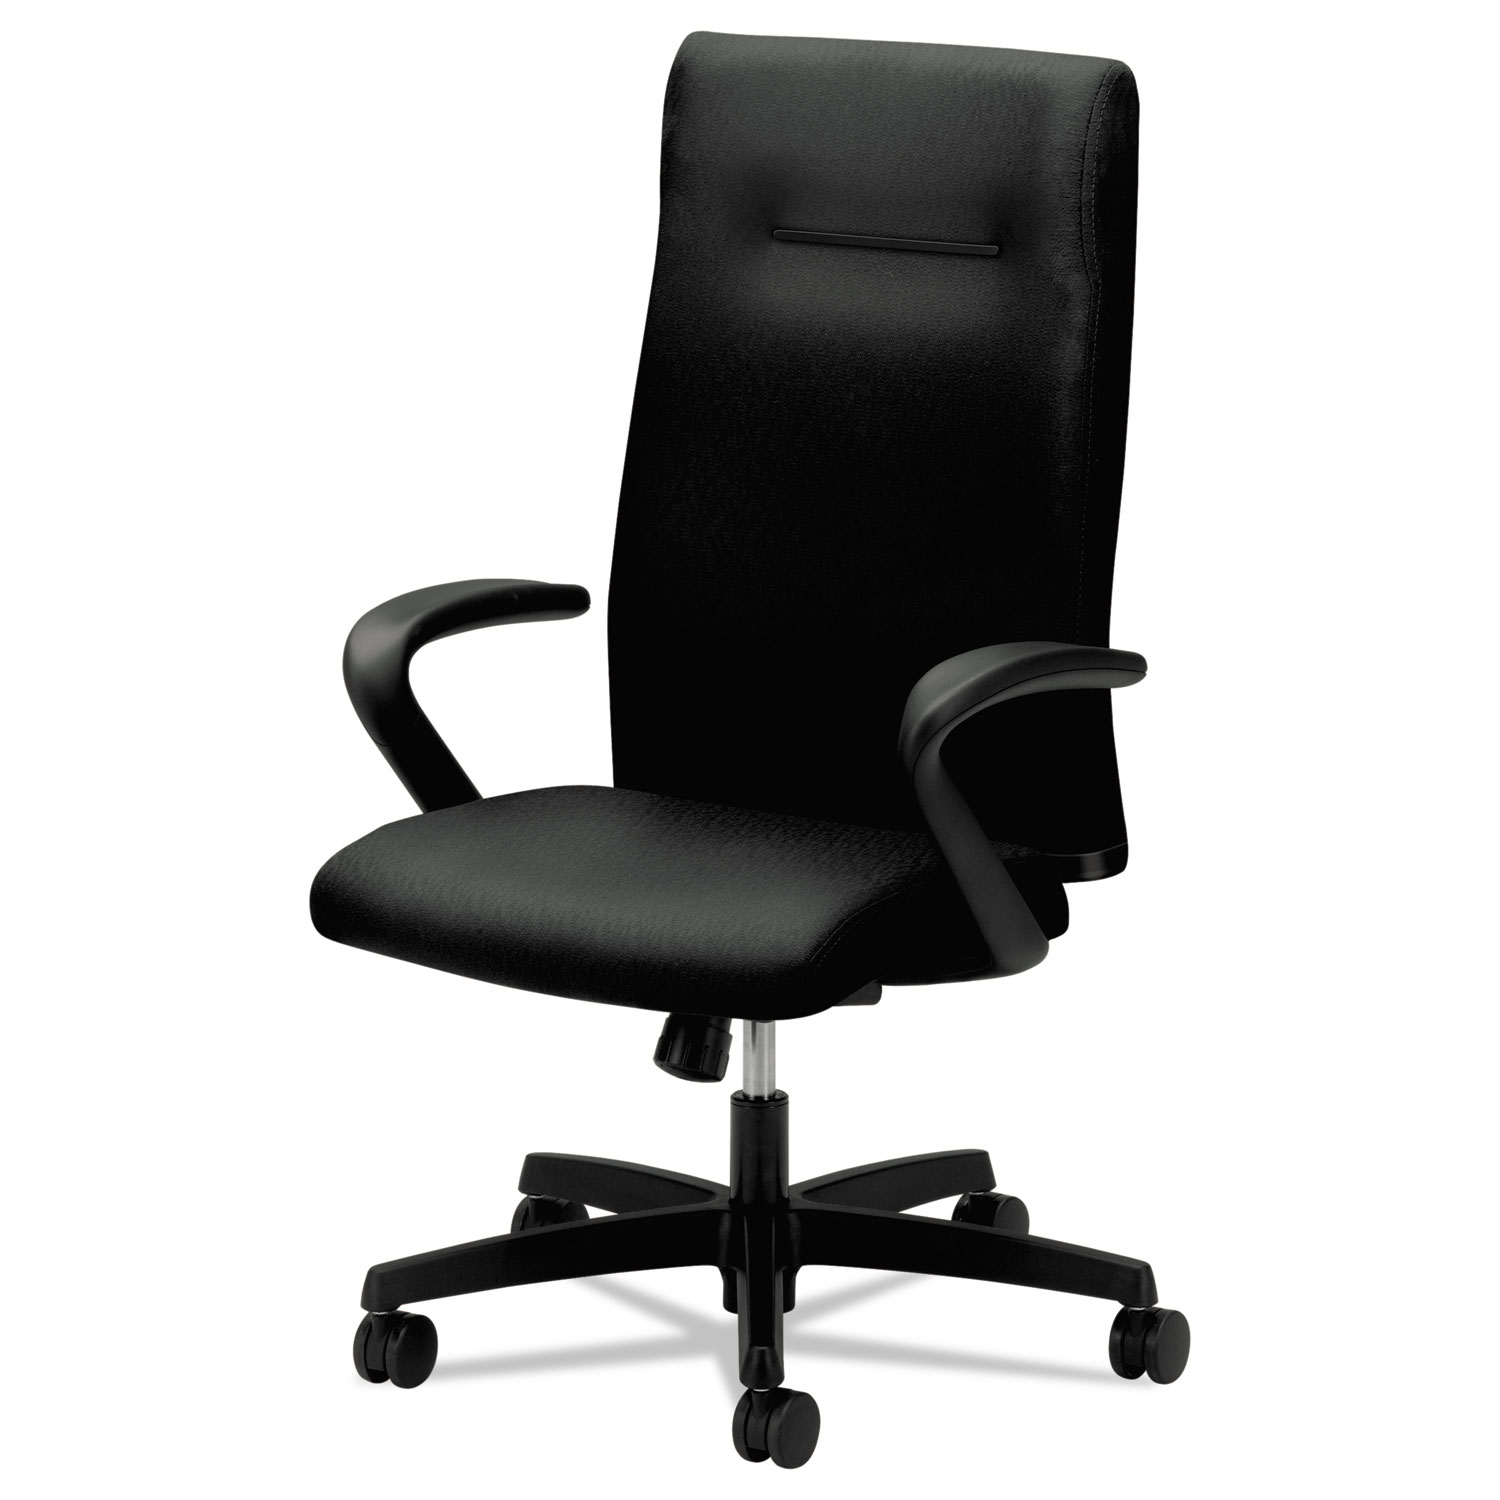 Ignition Series Executive High-Back Chair, Black Fabric Upholstery